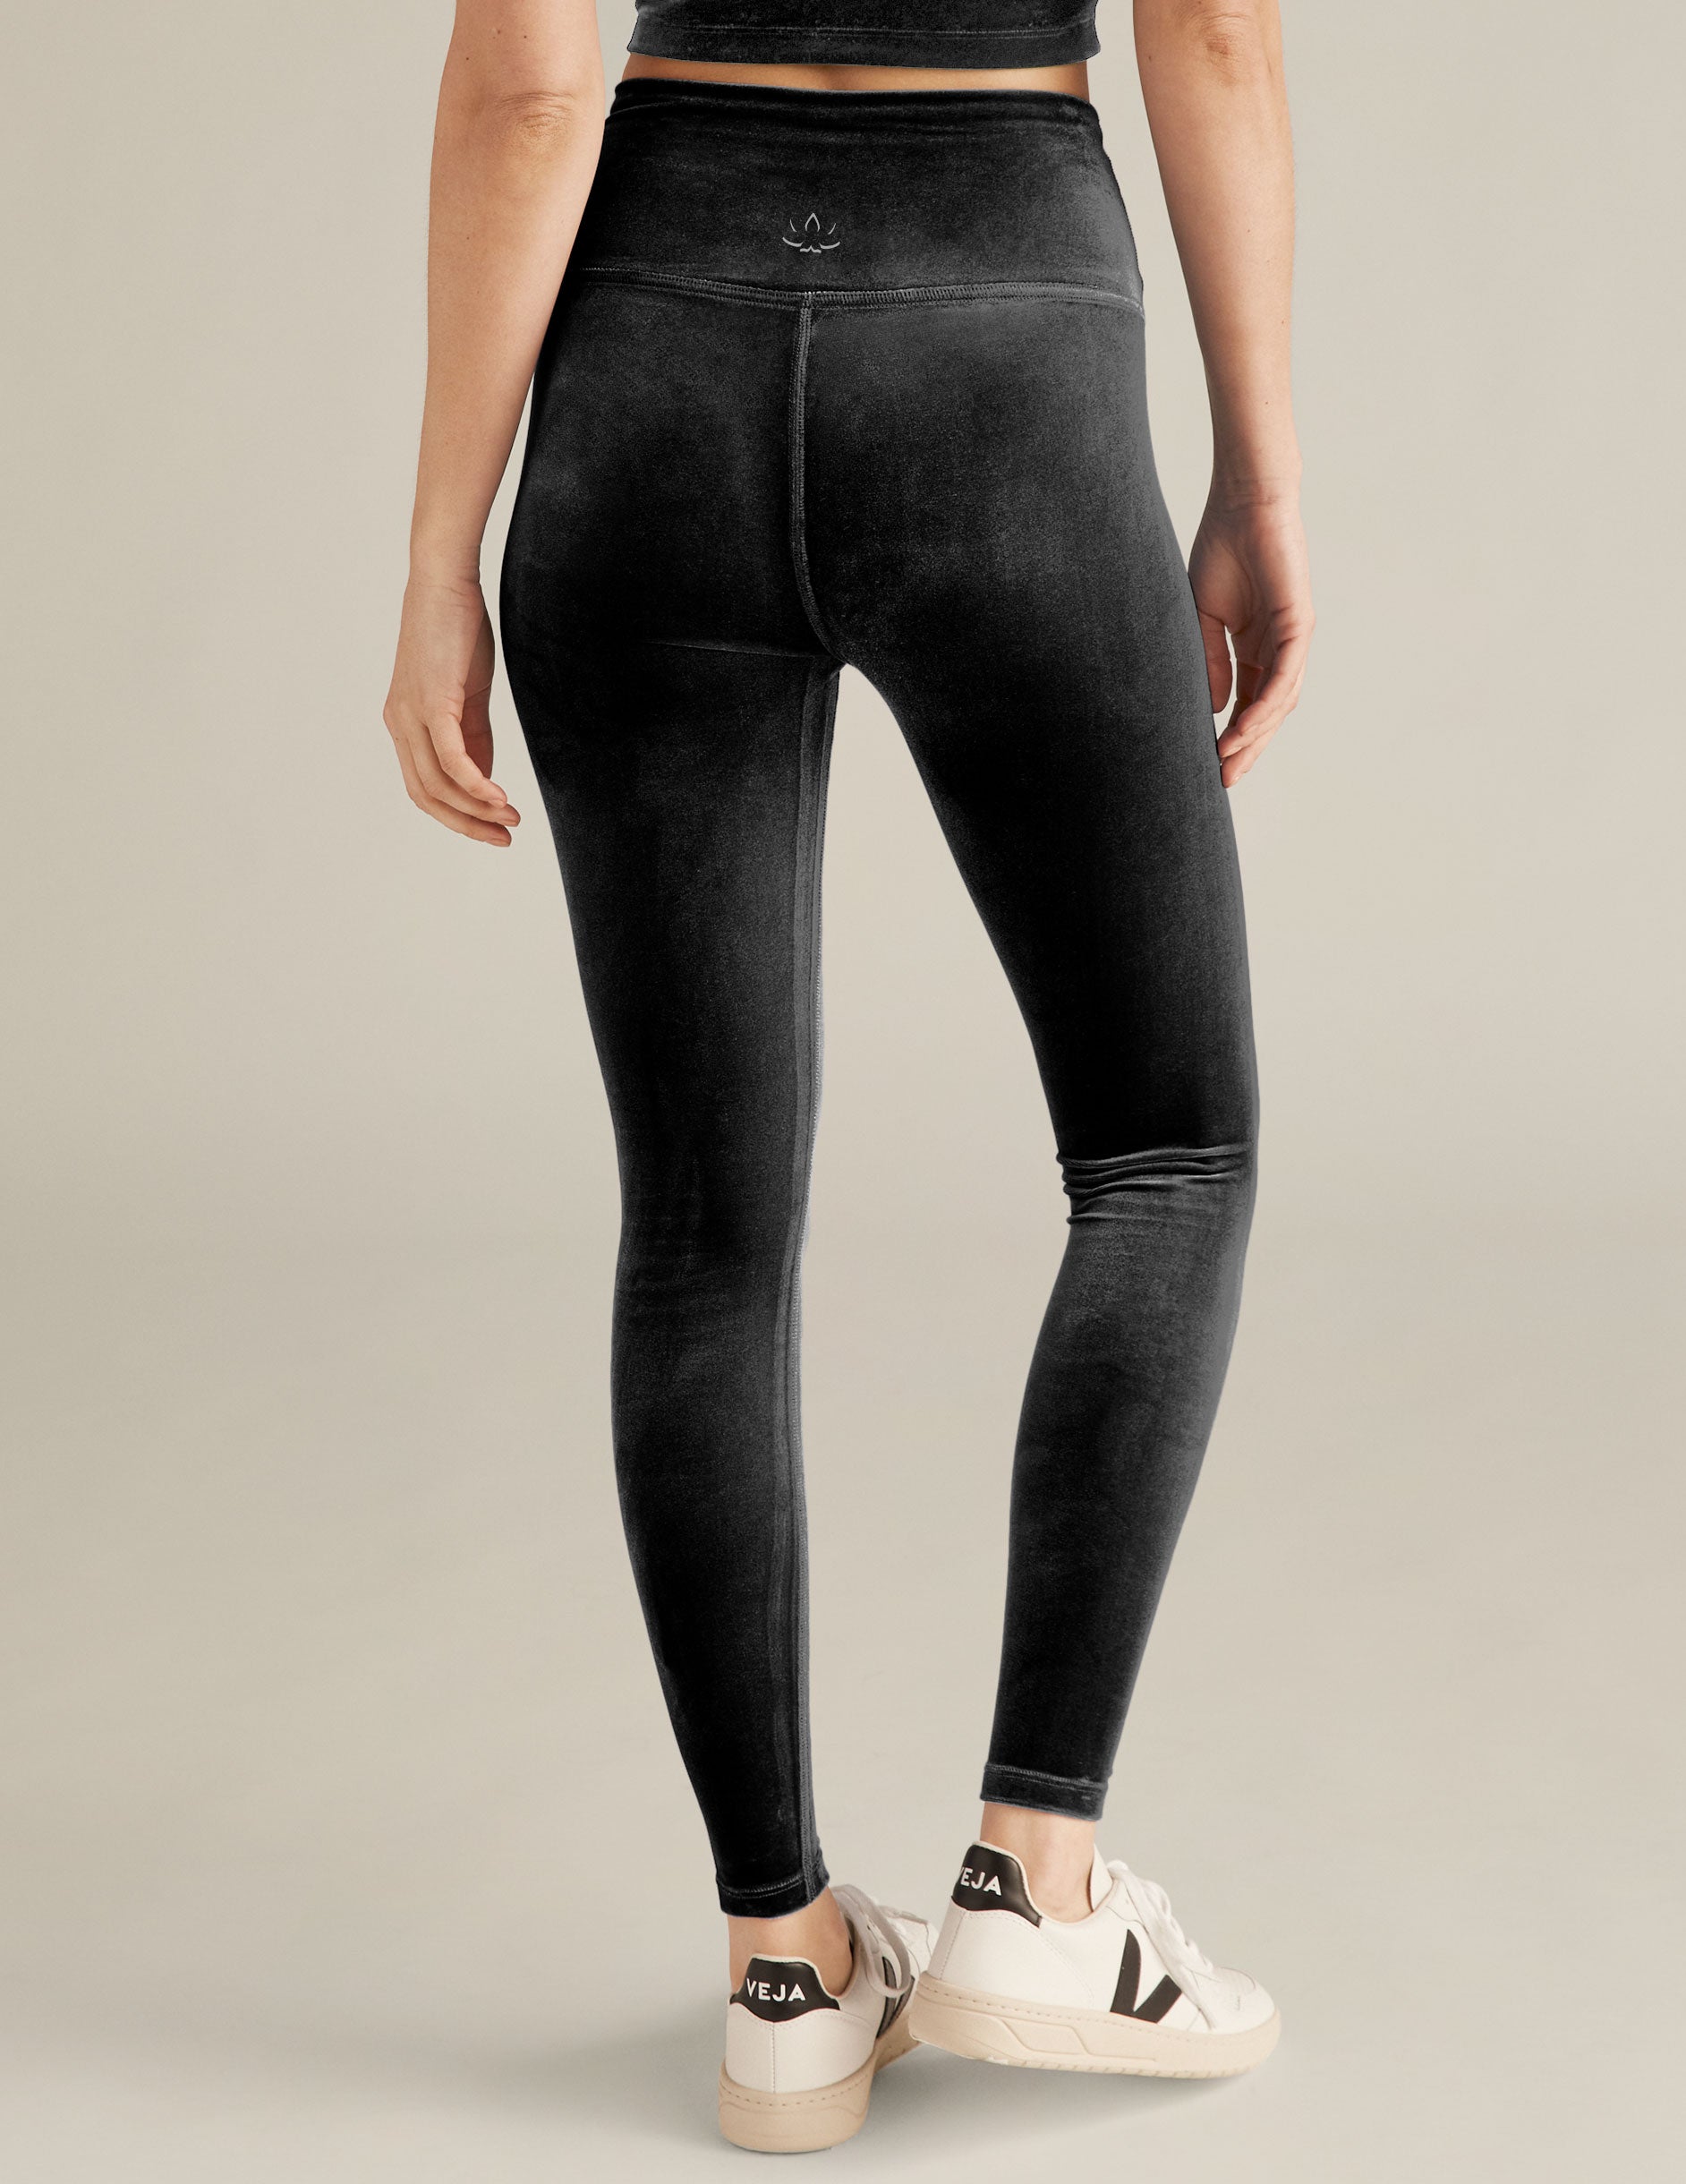 All in Motion Women's Ultra High-Rise Flare Leggings, Heathered